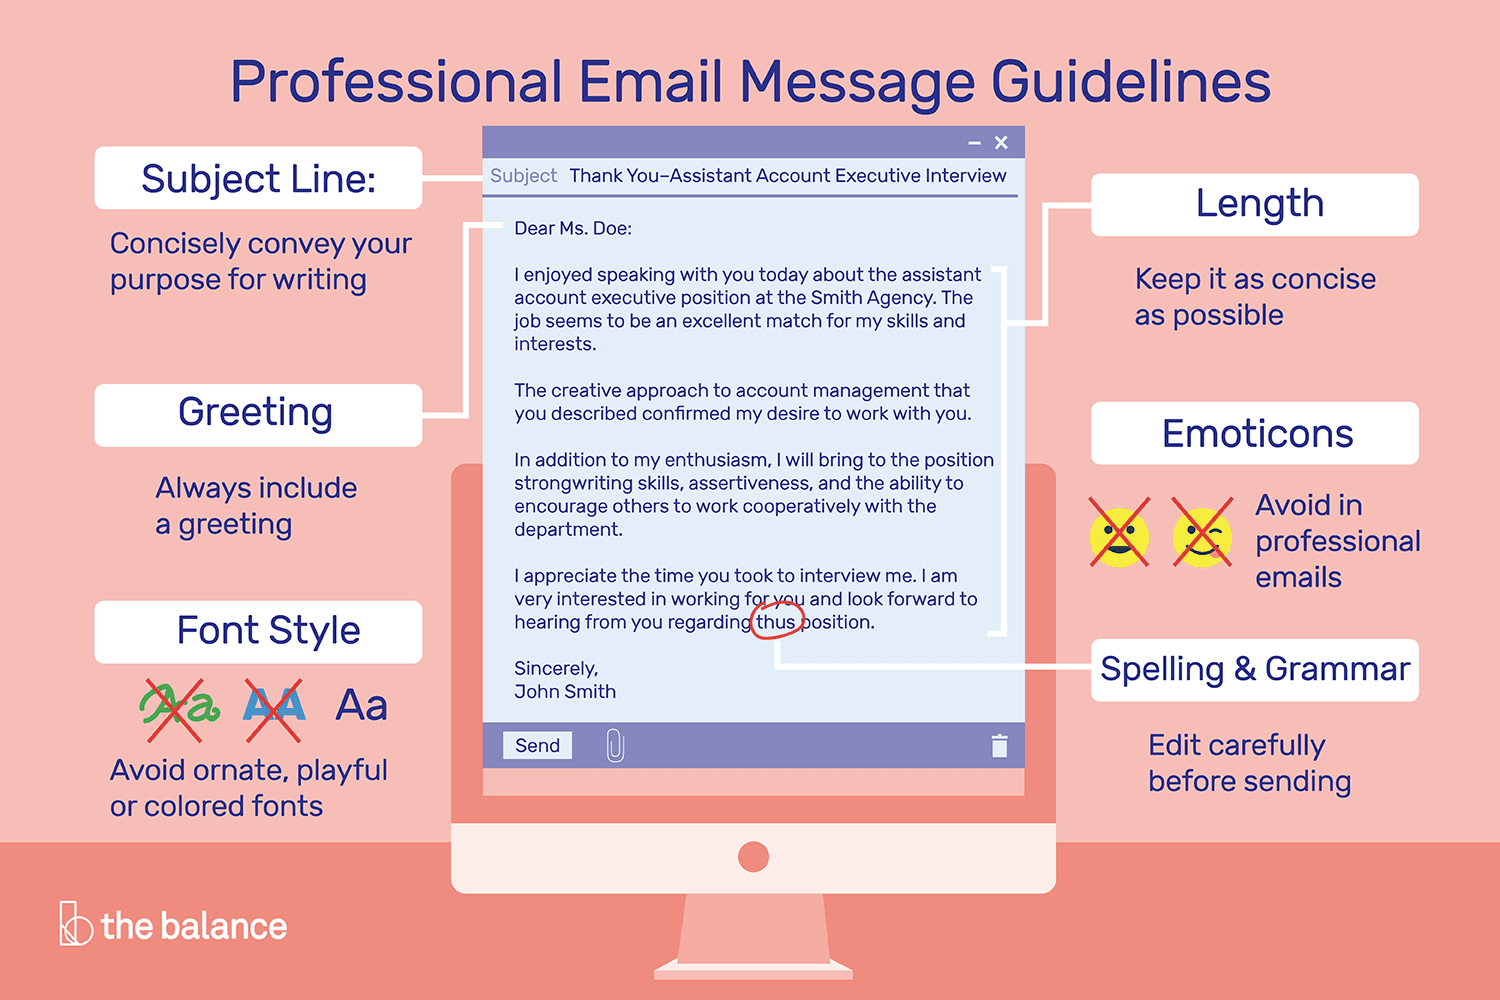 Make Your Emails Look Professional - Send Bulk Email Without Spamming